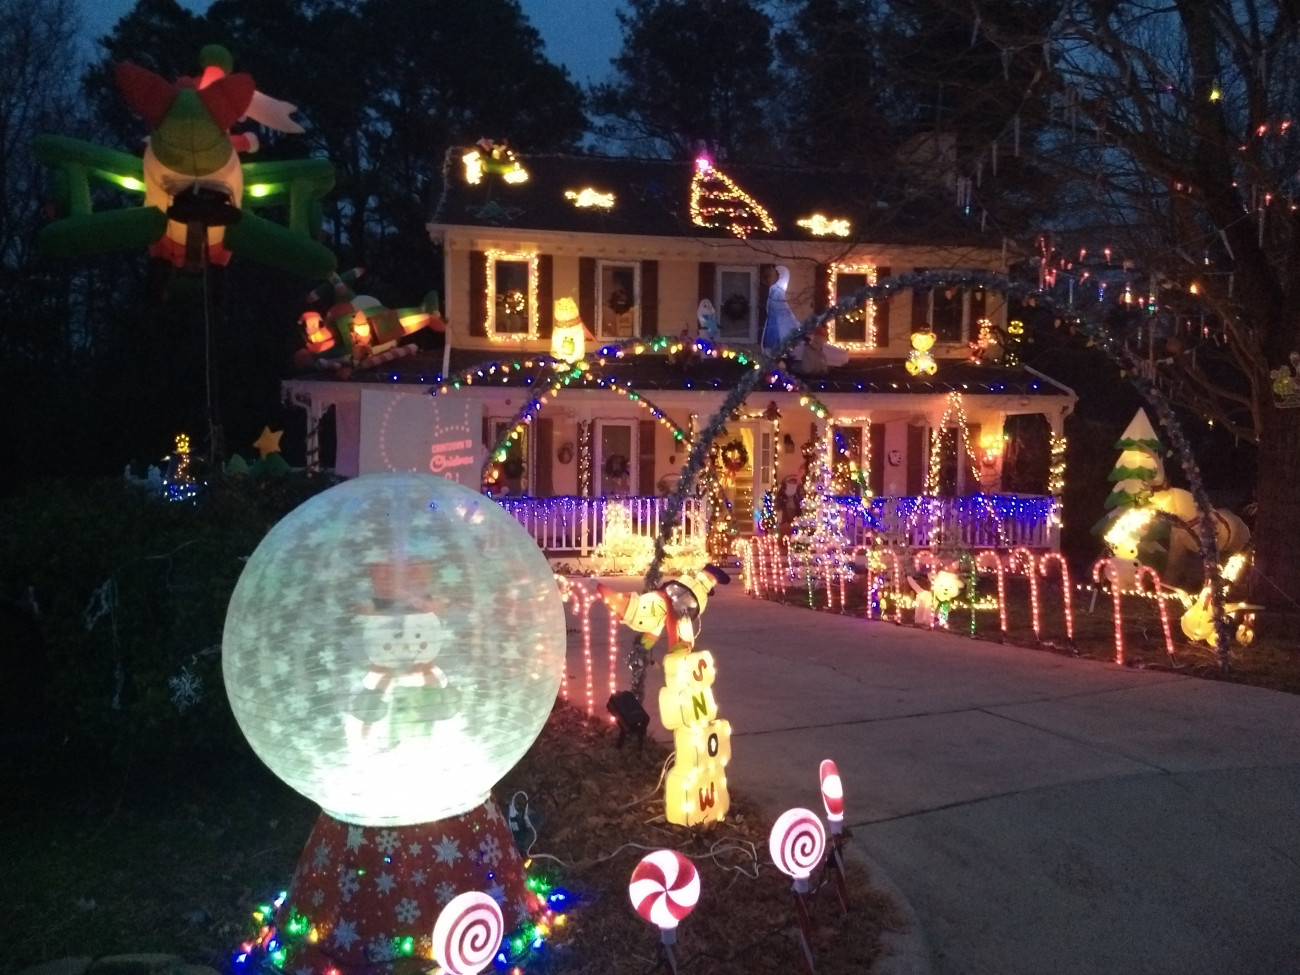 Candy canes along the driveway, snow globe in front of house, lots of christmas lights on home.